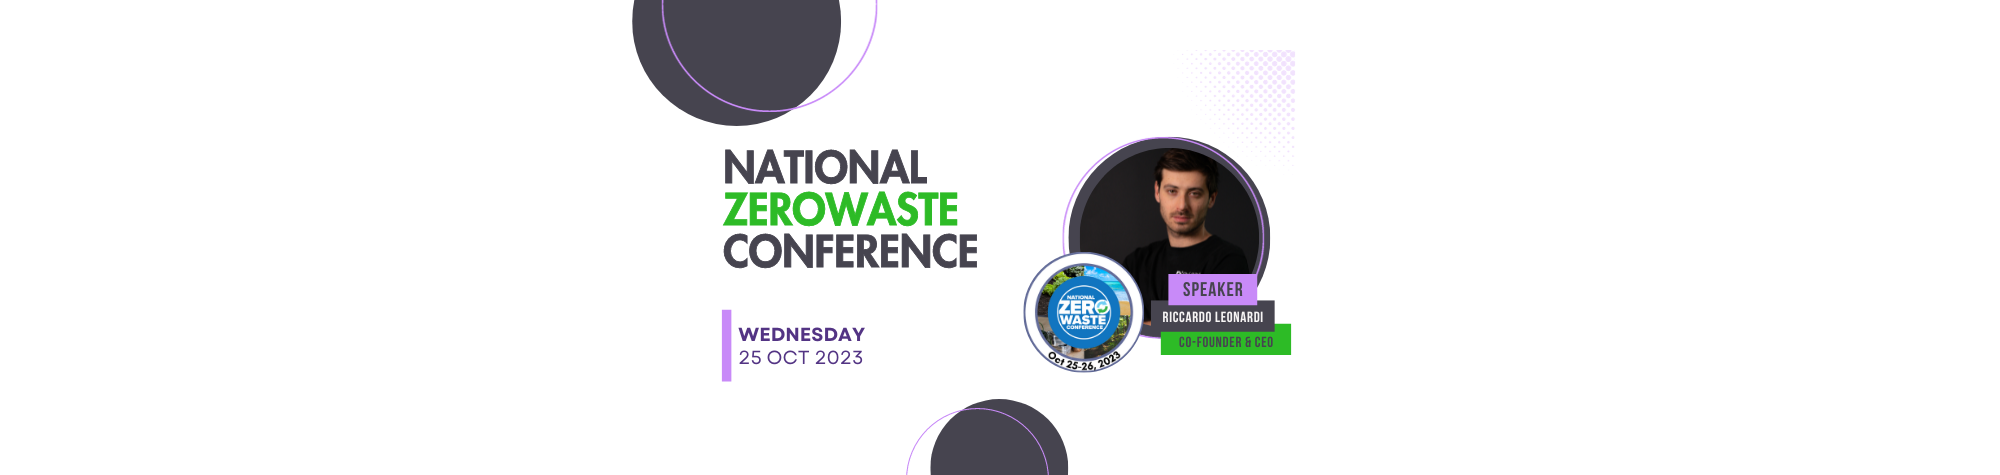 ReLearn at National Zero Waste Conference